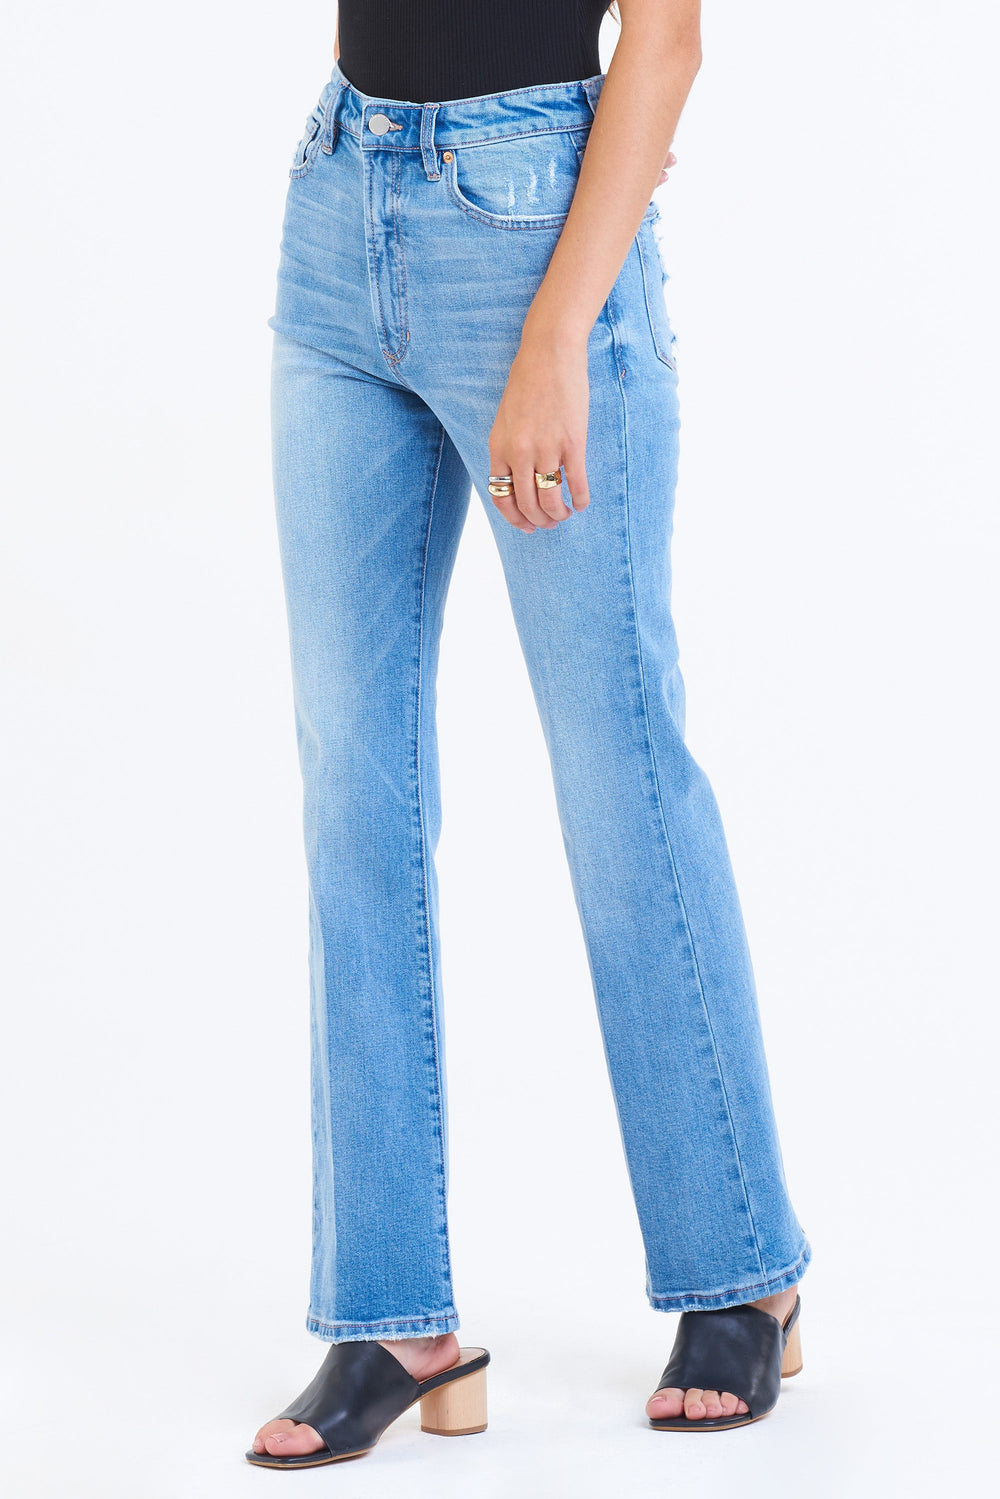 image of a female model wearing a PARIS SUPER HIGH RISE BOOTCUT JEANS TOPANGA JEANS